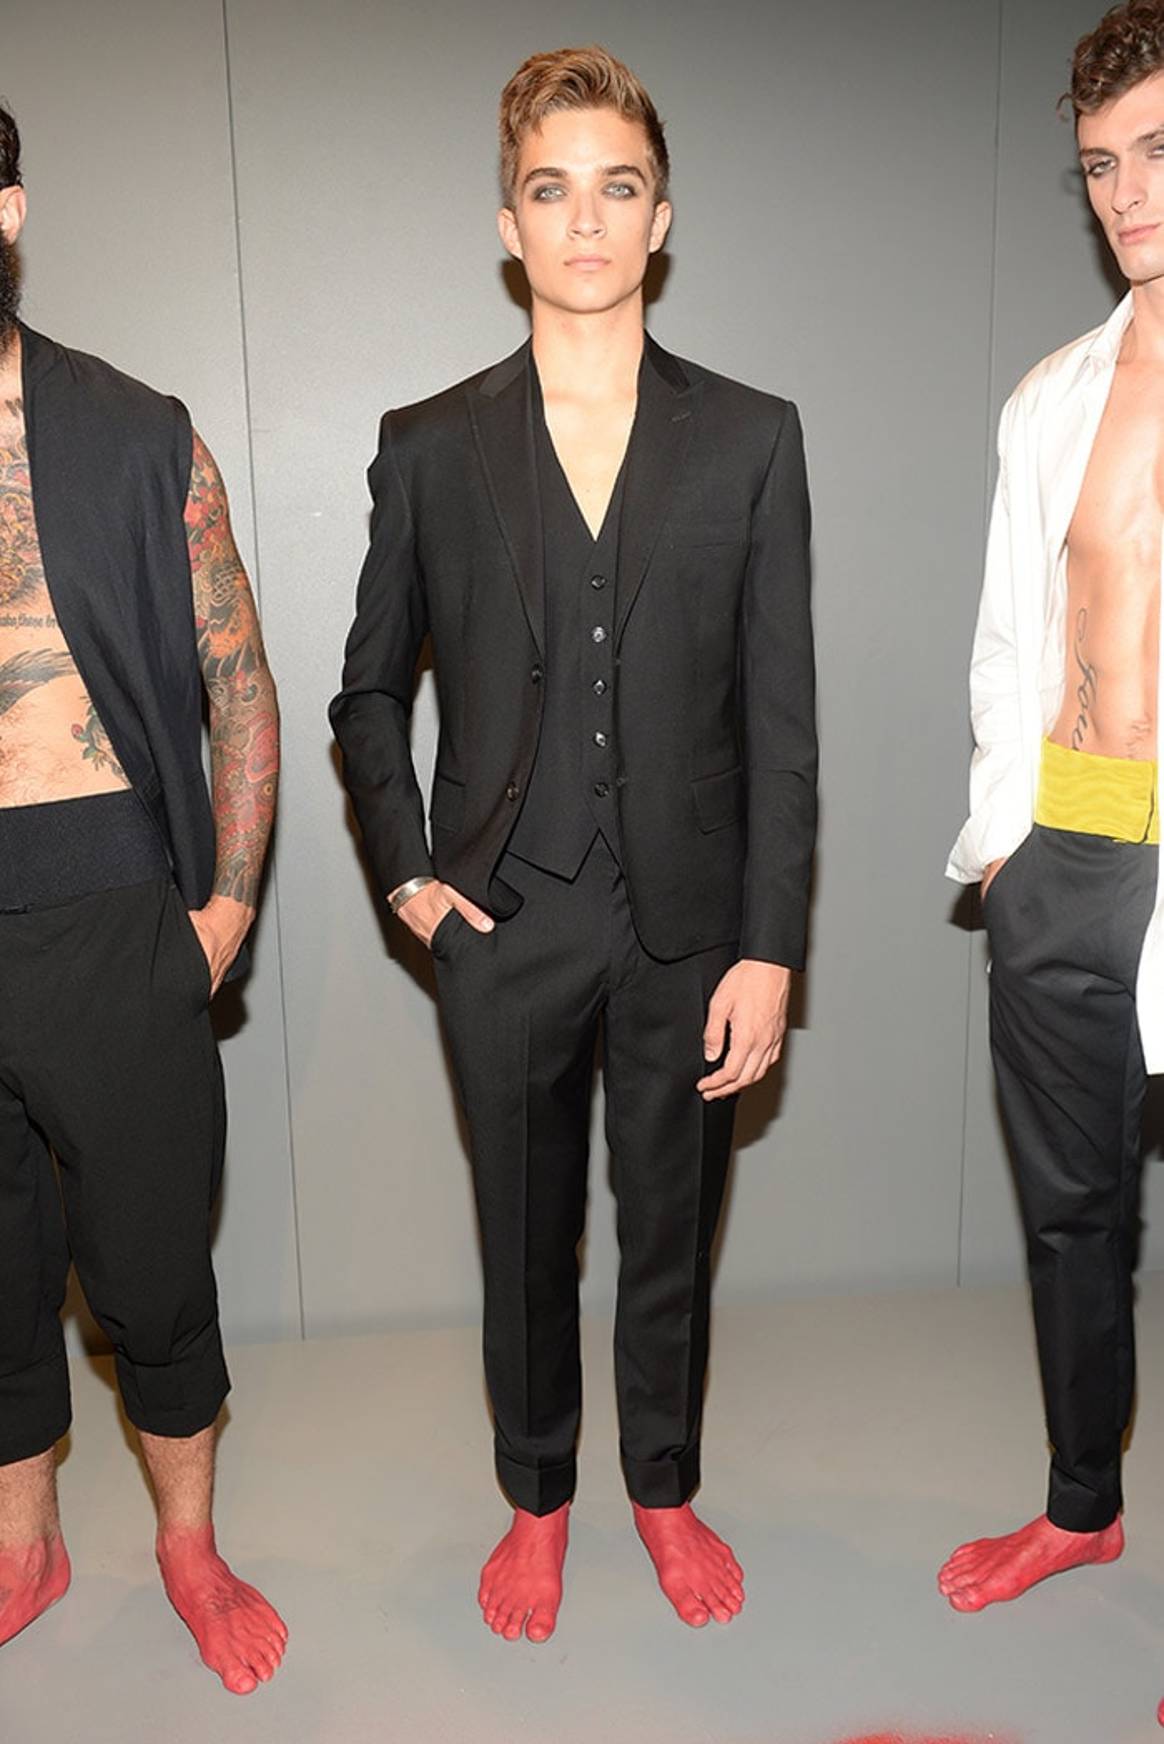 Wrap of NYFW: Men's and the top 5 trends